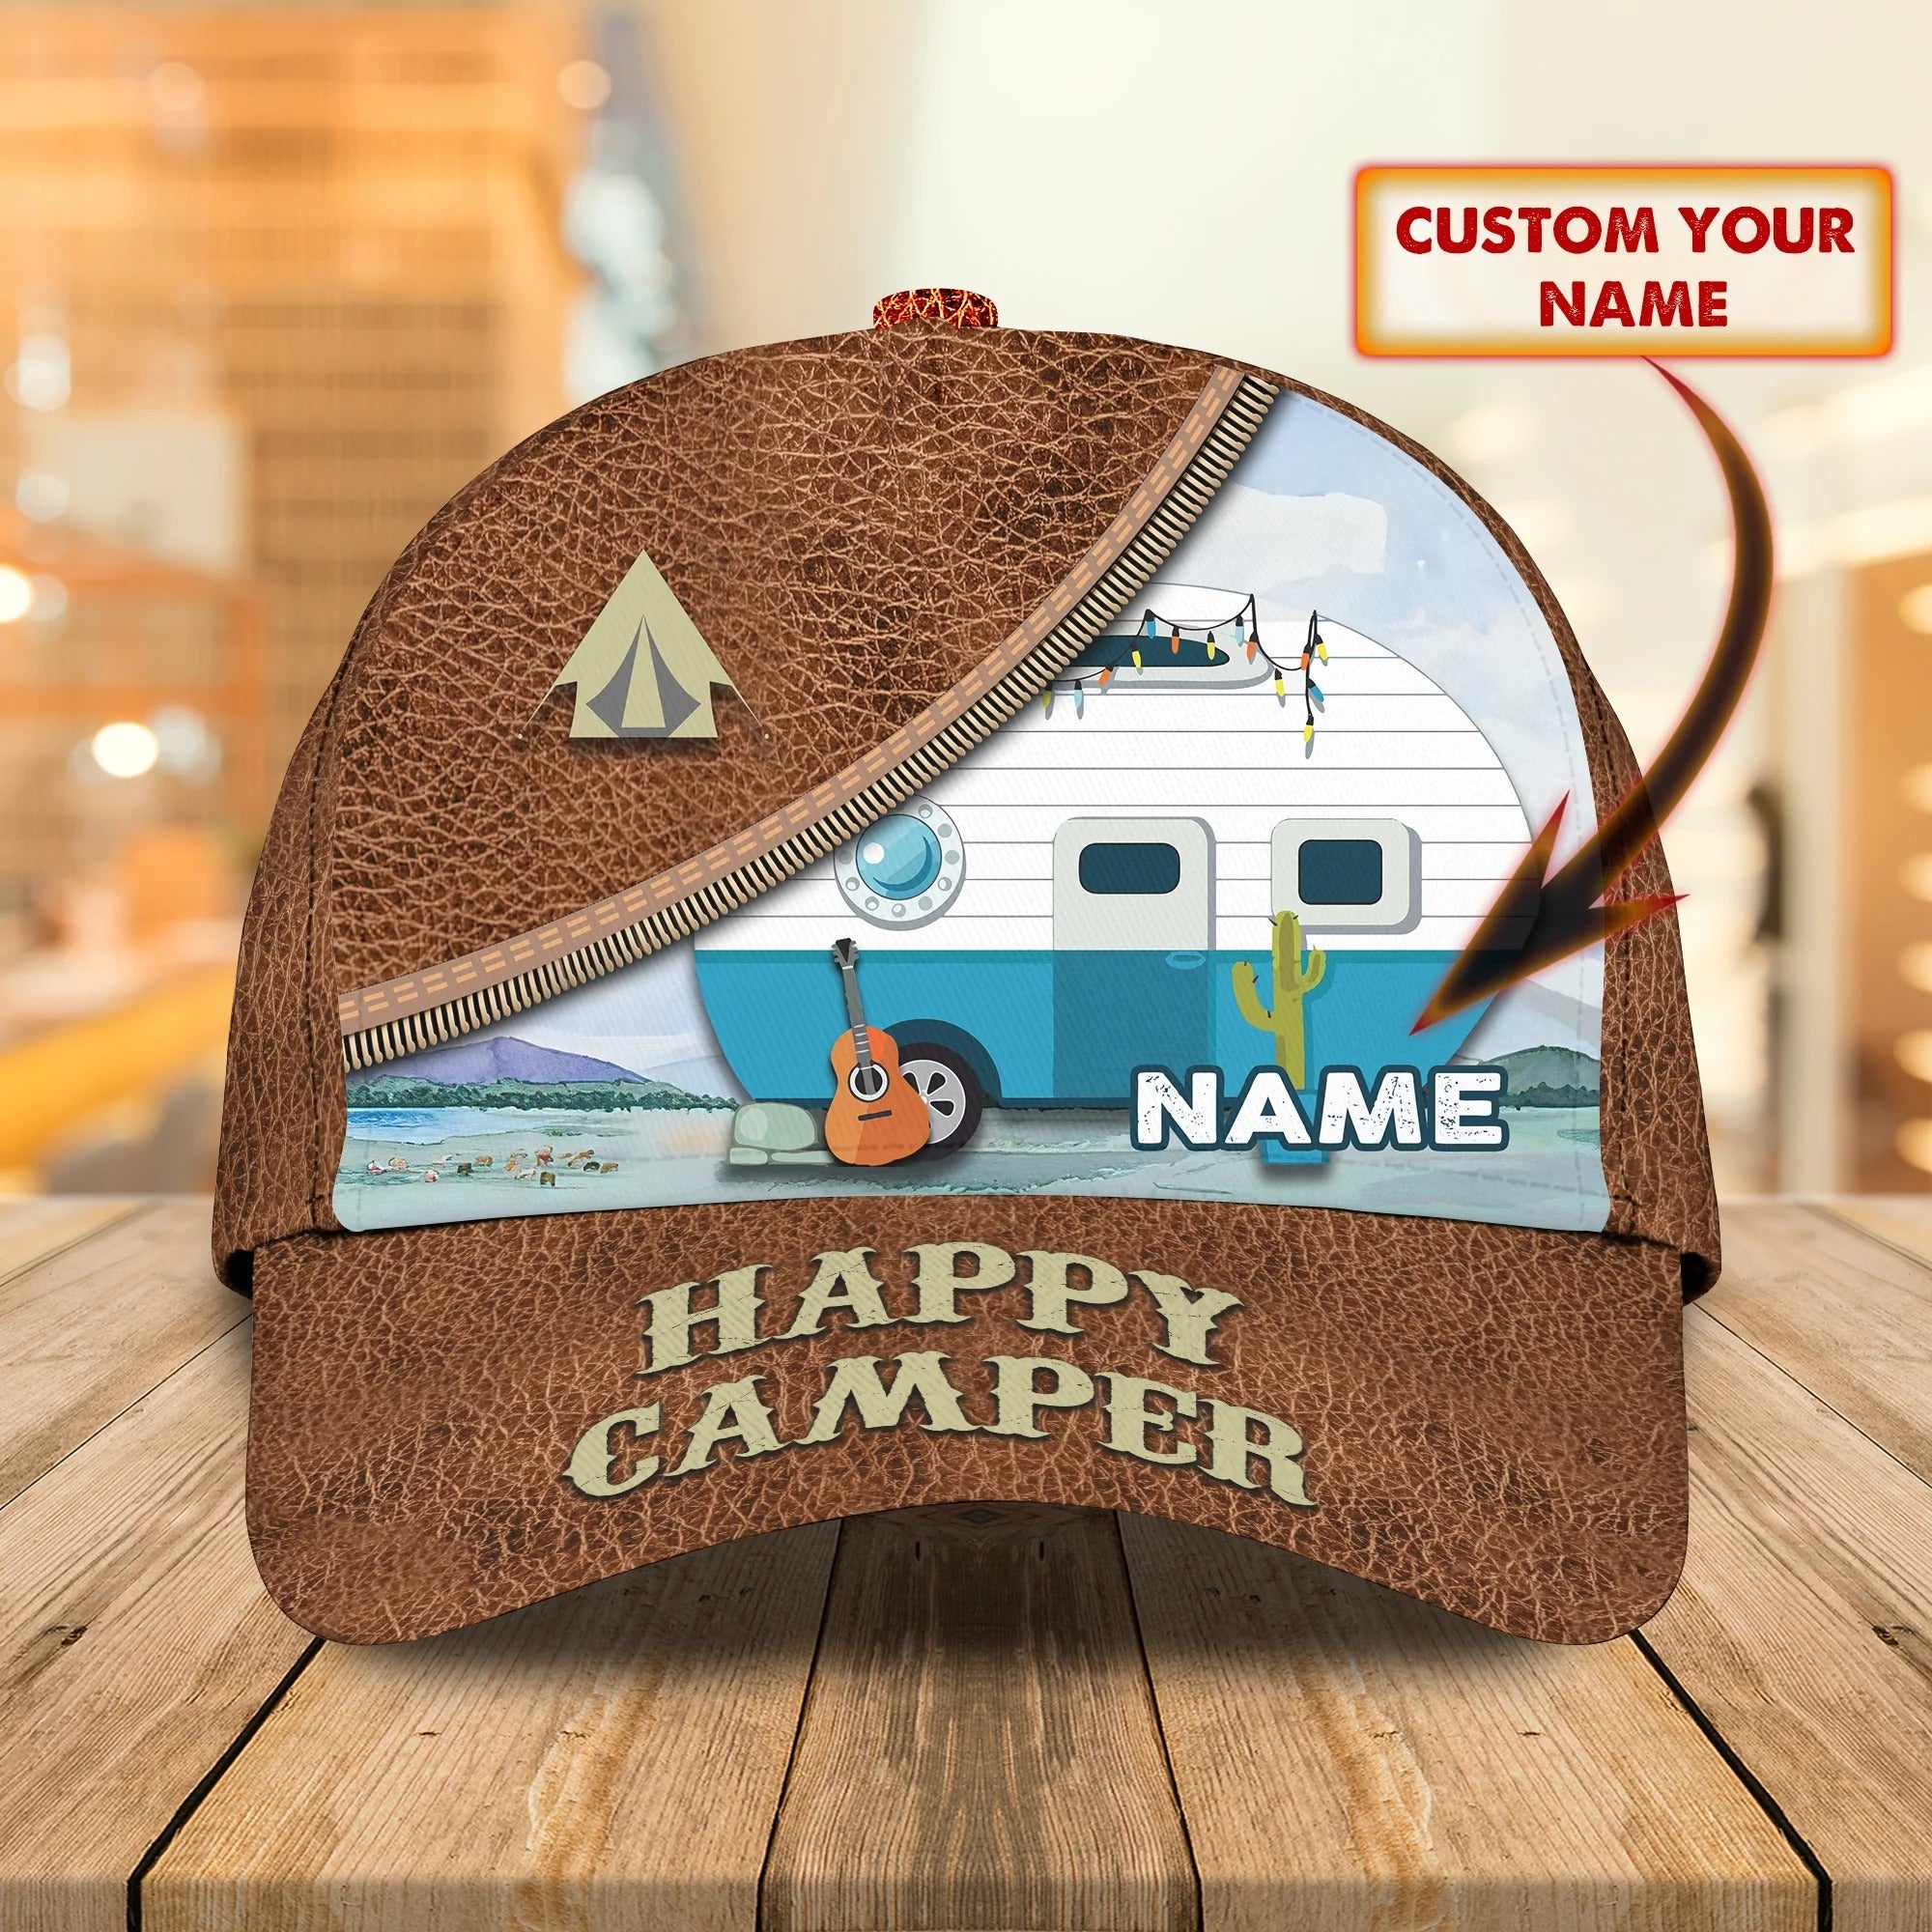 Personalized With Name Baseball Cap Hat For Camping/ Happy Camper Classic Cap Hat/ Camper Cap